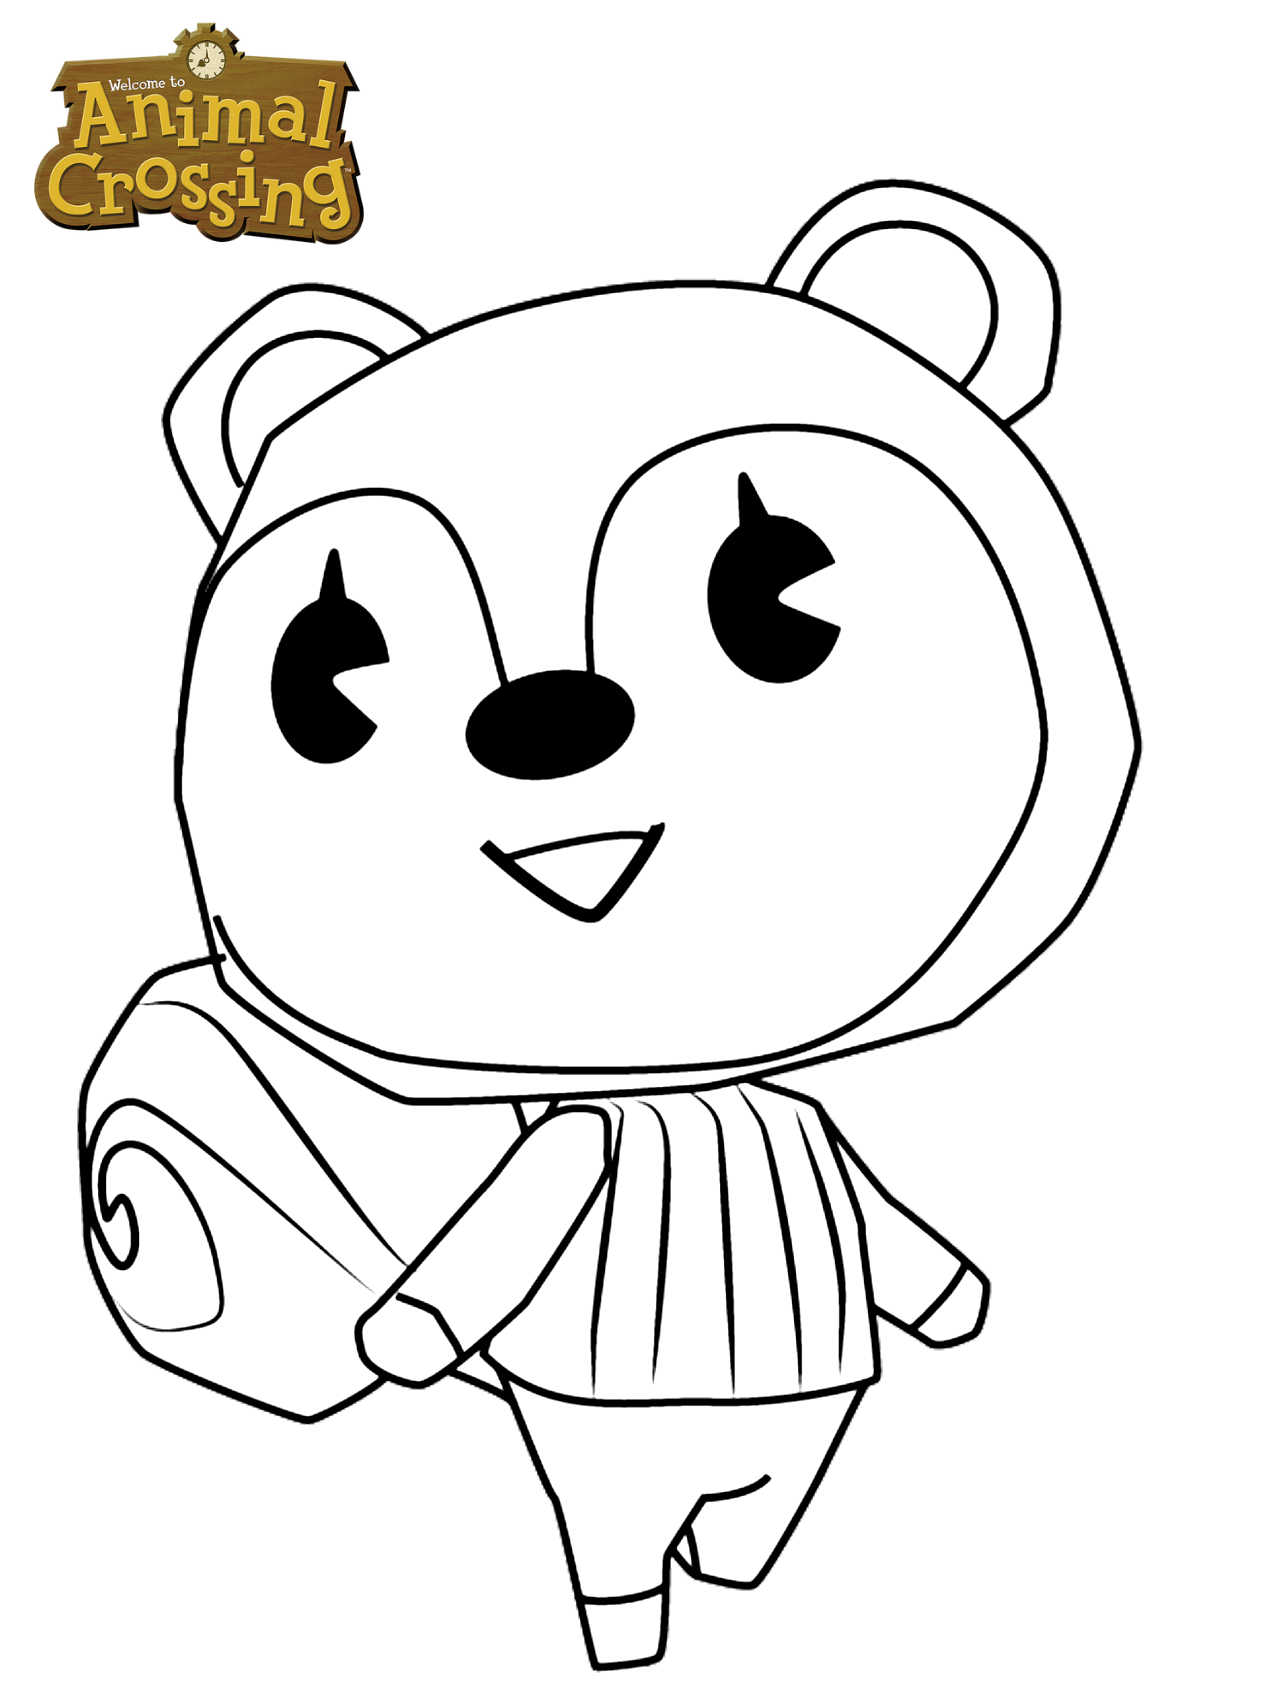 Animal Crossing Coloring Pages - Best Animal Crossing Coloring Pages